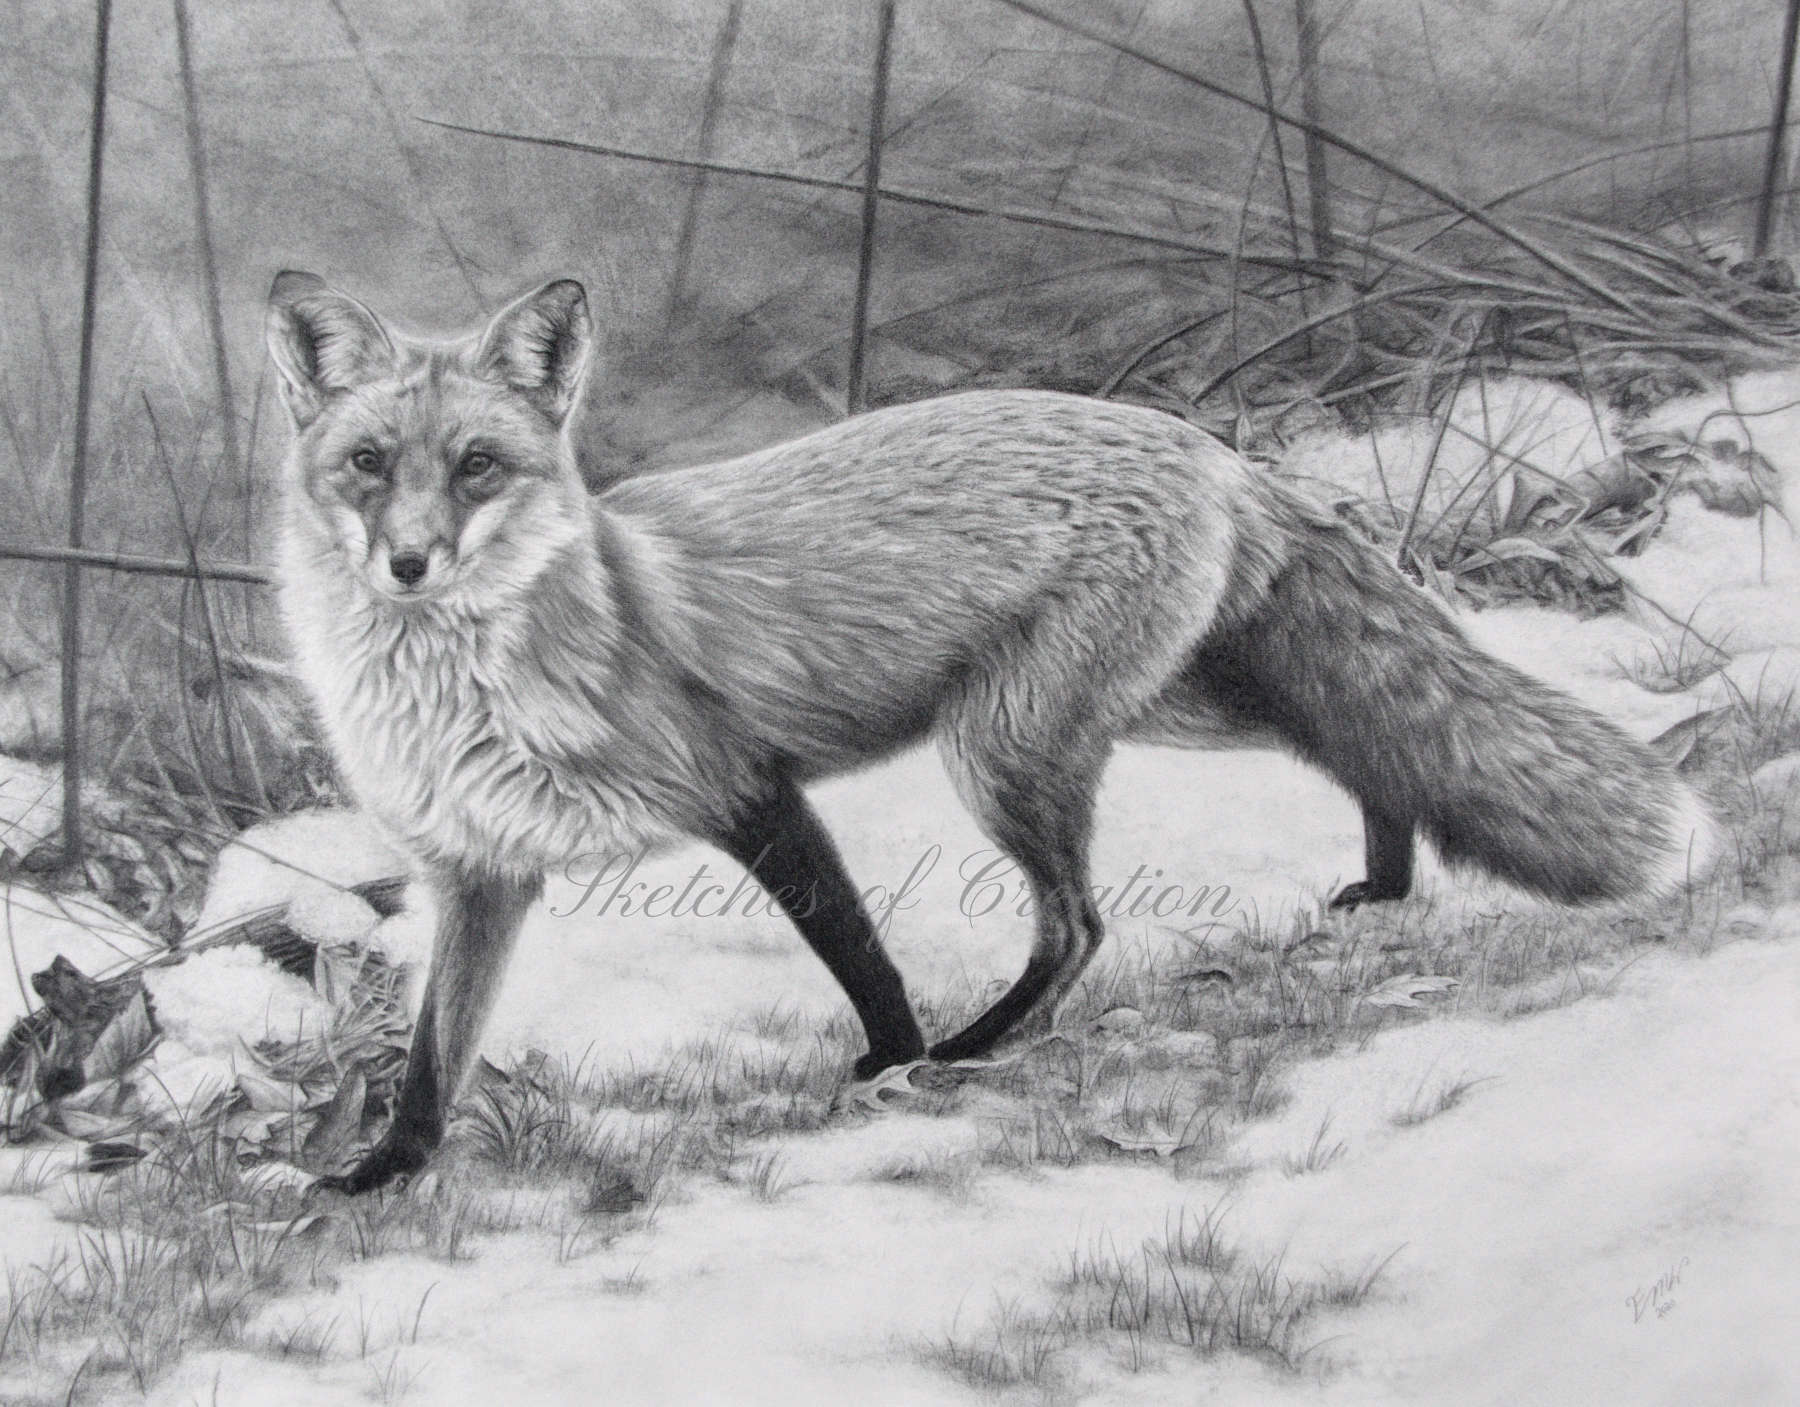 'Roam' a drawing of a fox in the snow. 11x14 inches. Completed November 2020